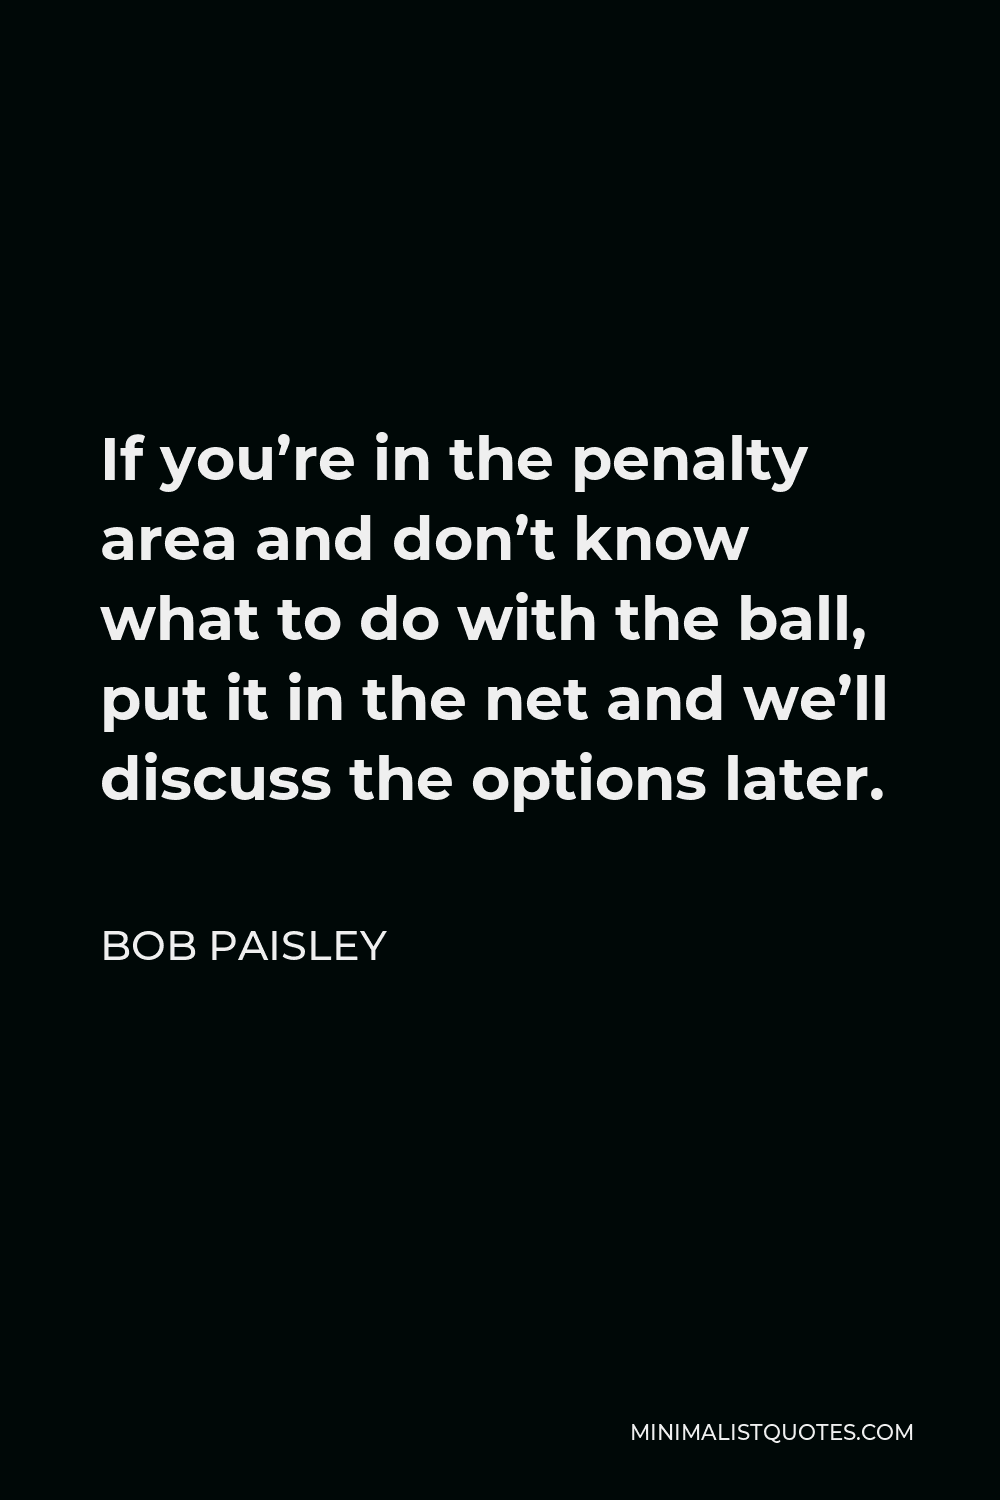 Bob Paisley Quote - If you’re in the penalty area and don’t know what to do with the ball, put it in the net and we’ll discuss the options later.